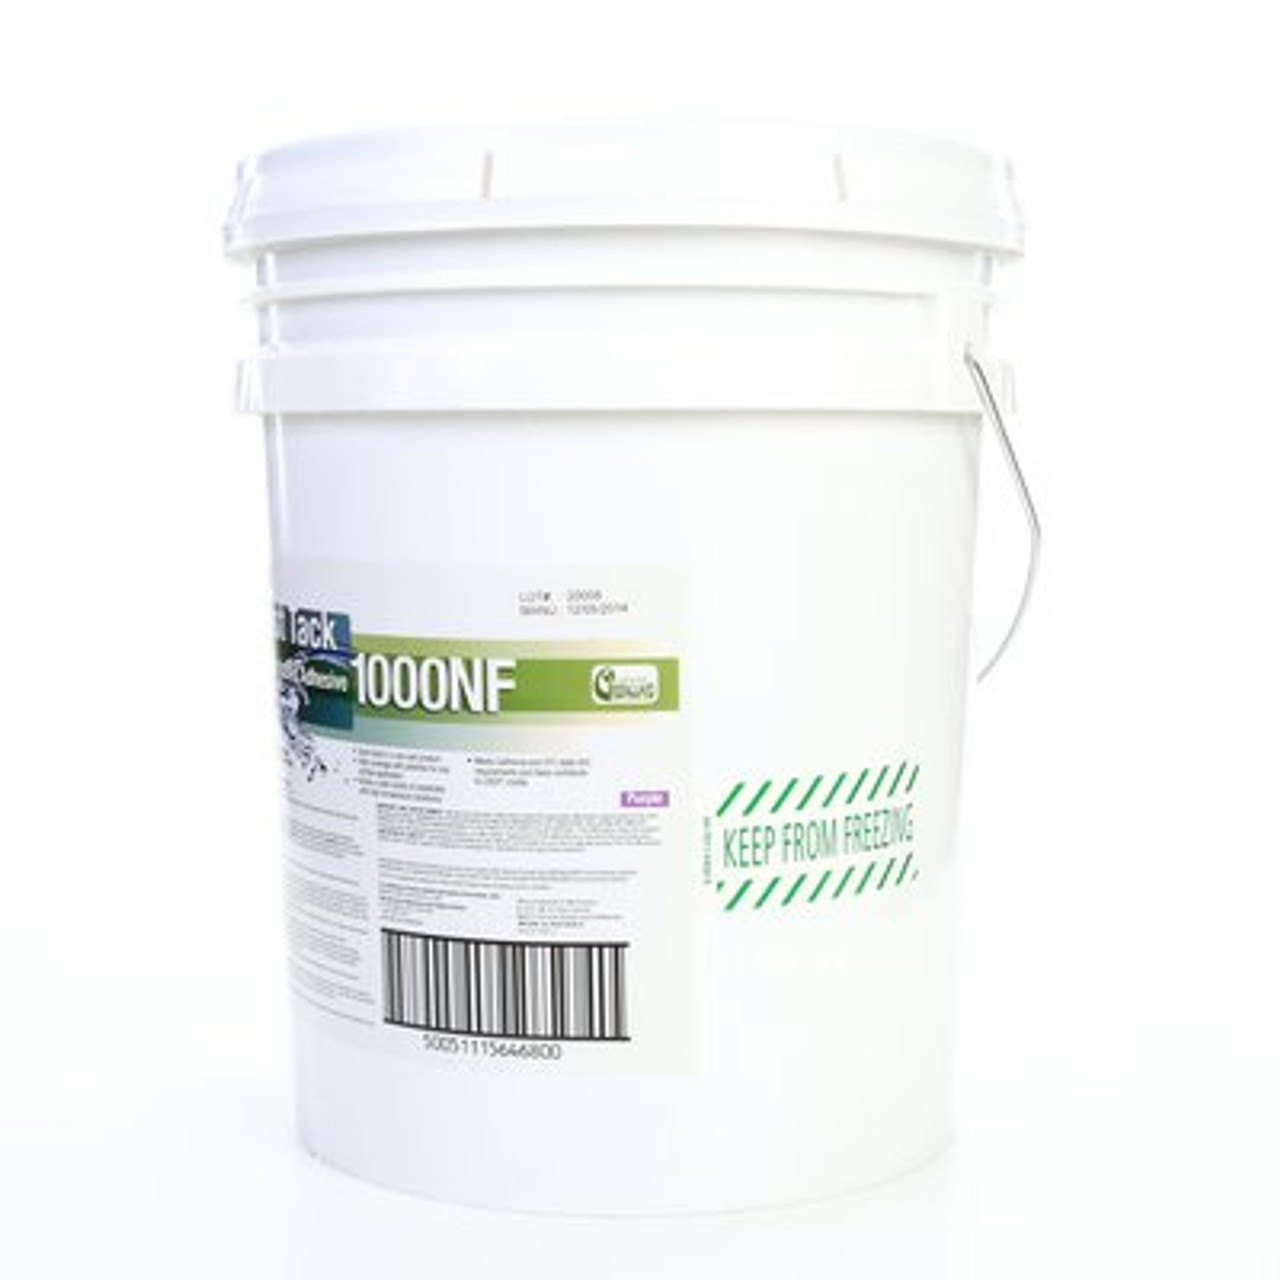 3M™ Fast Tack Water Based Adhesive 1000NF, Purple, 5 Gallon Pail